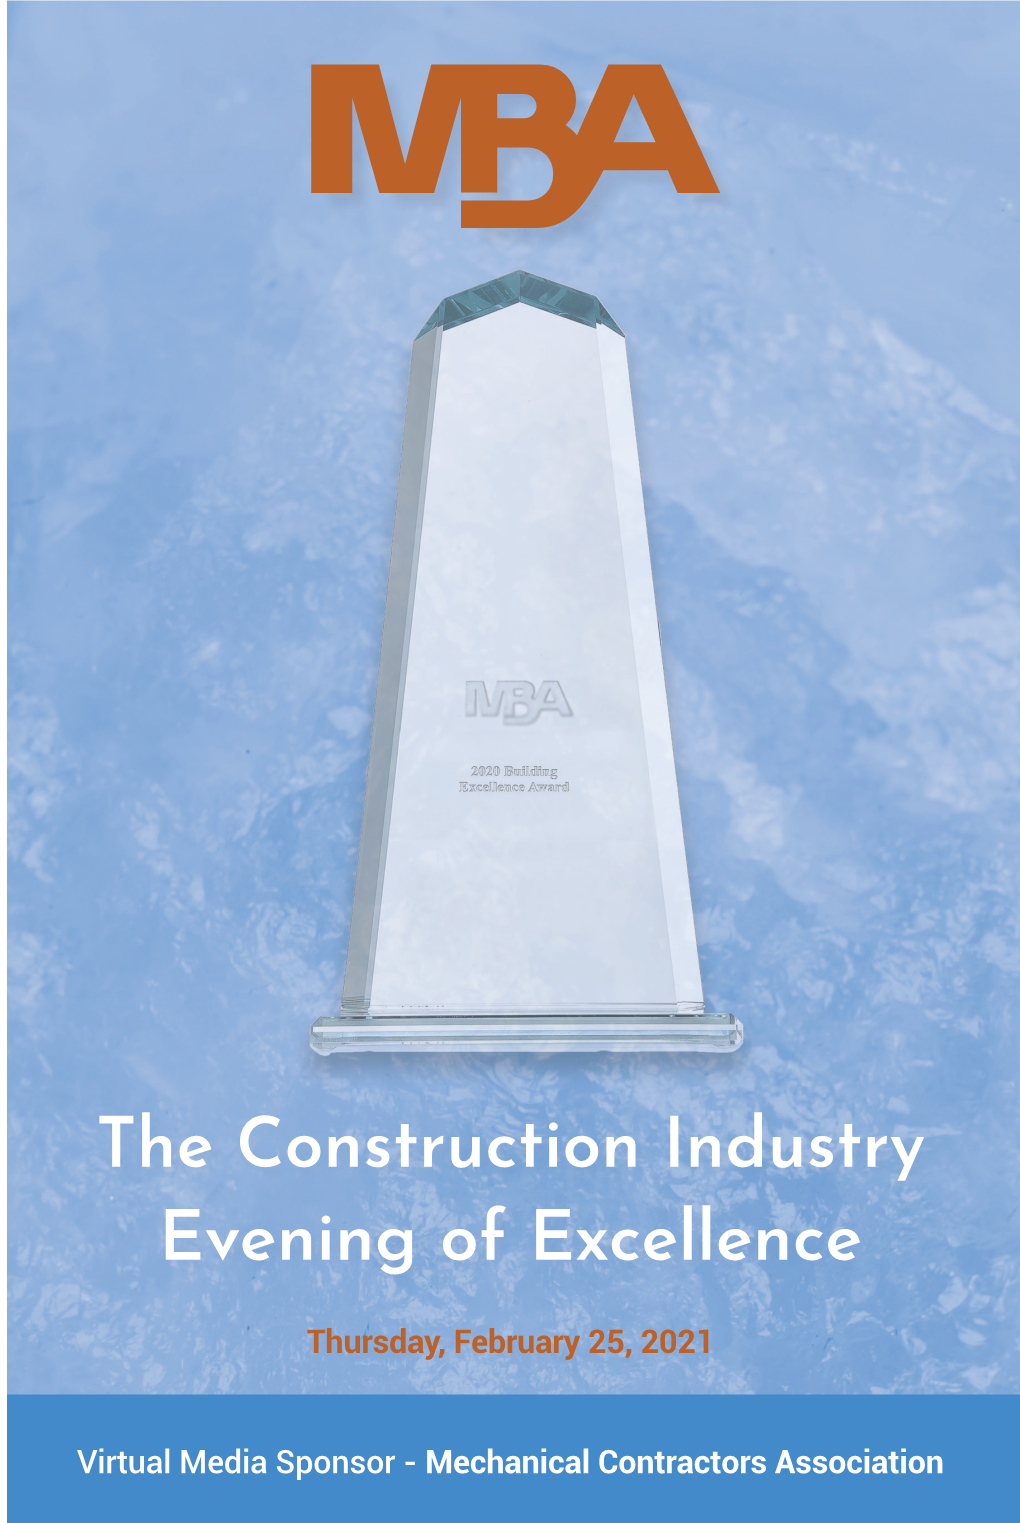 The Construction Industry Evening of Excellence